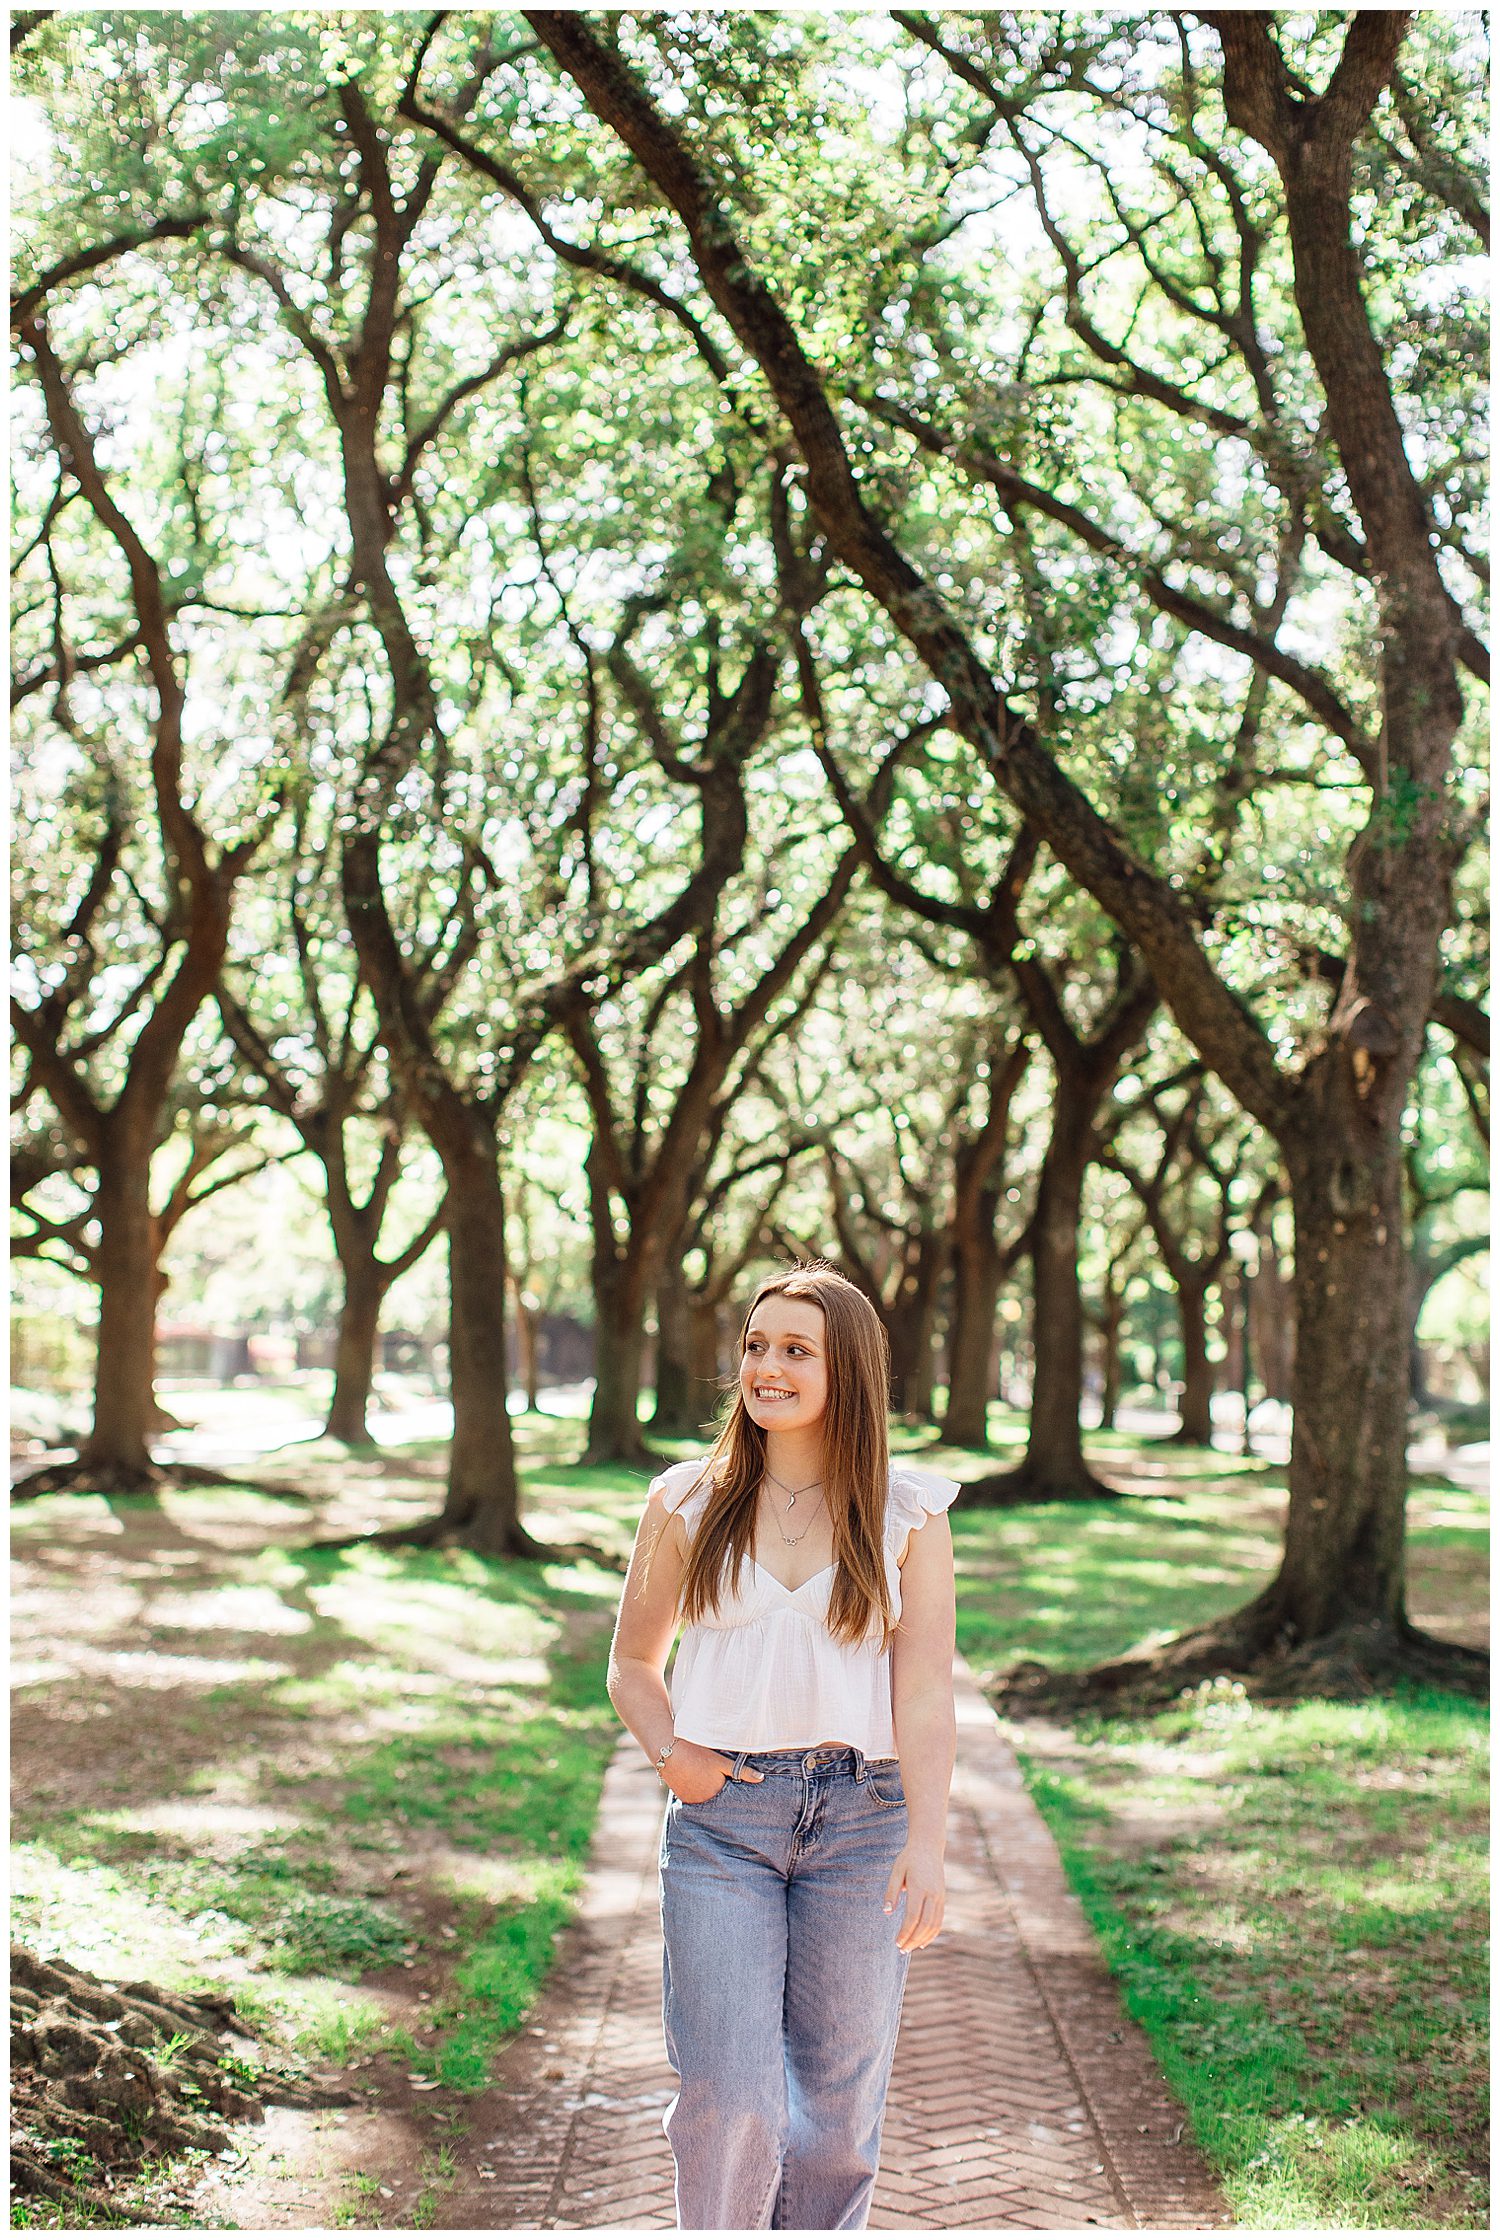 high school senior girl walking with hand in pocket wearing jeans and white blouse outdoors by trees Houston